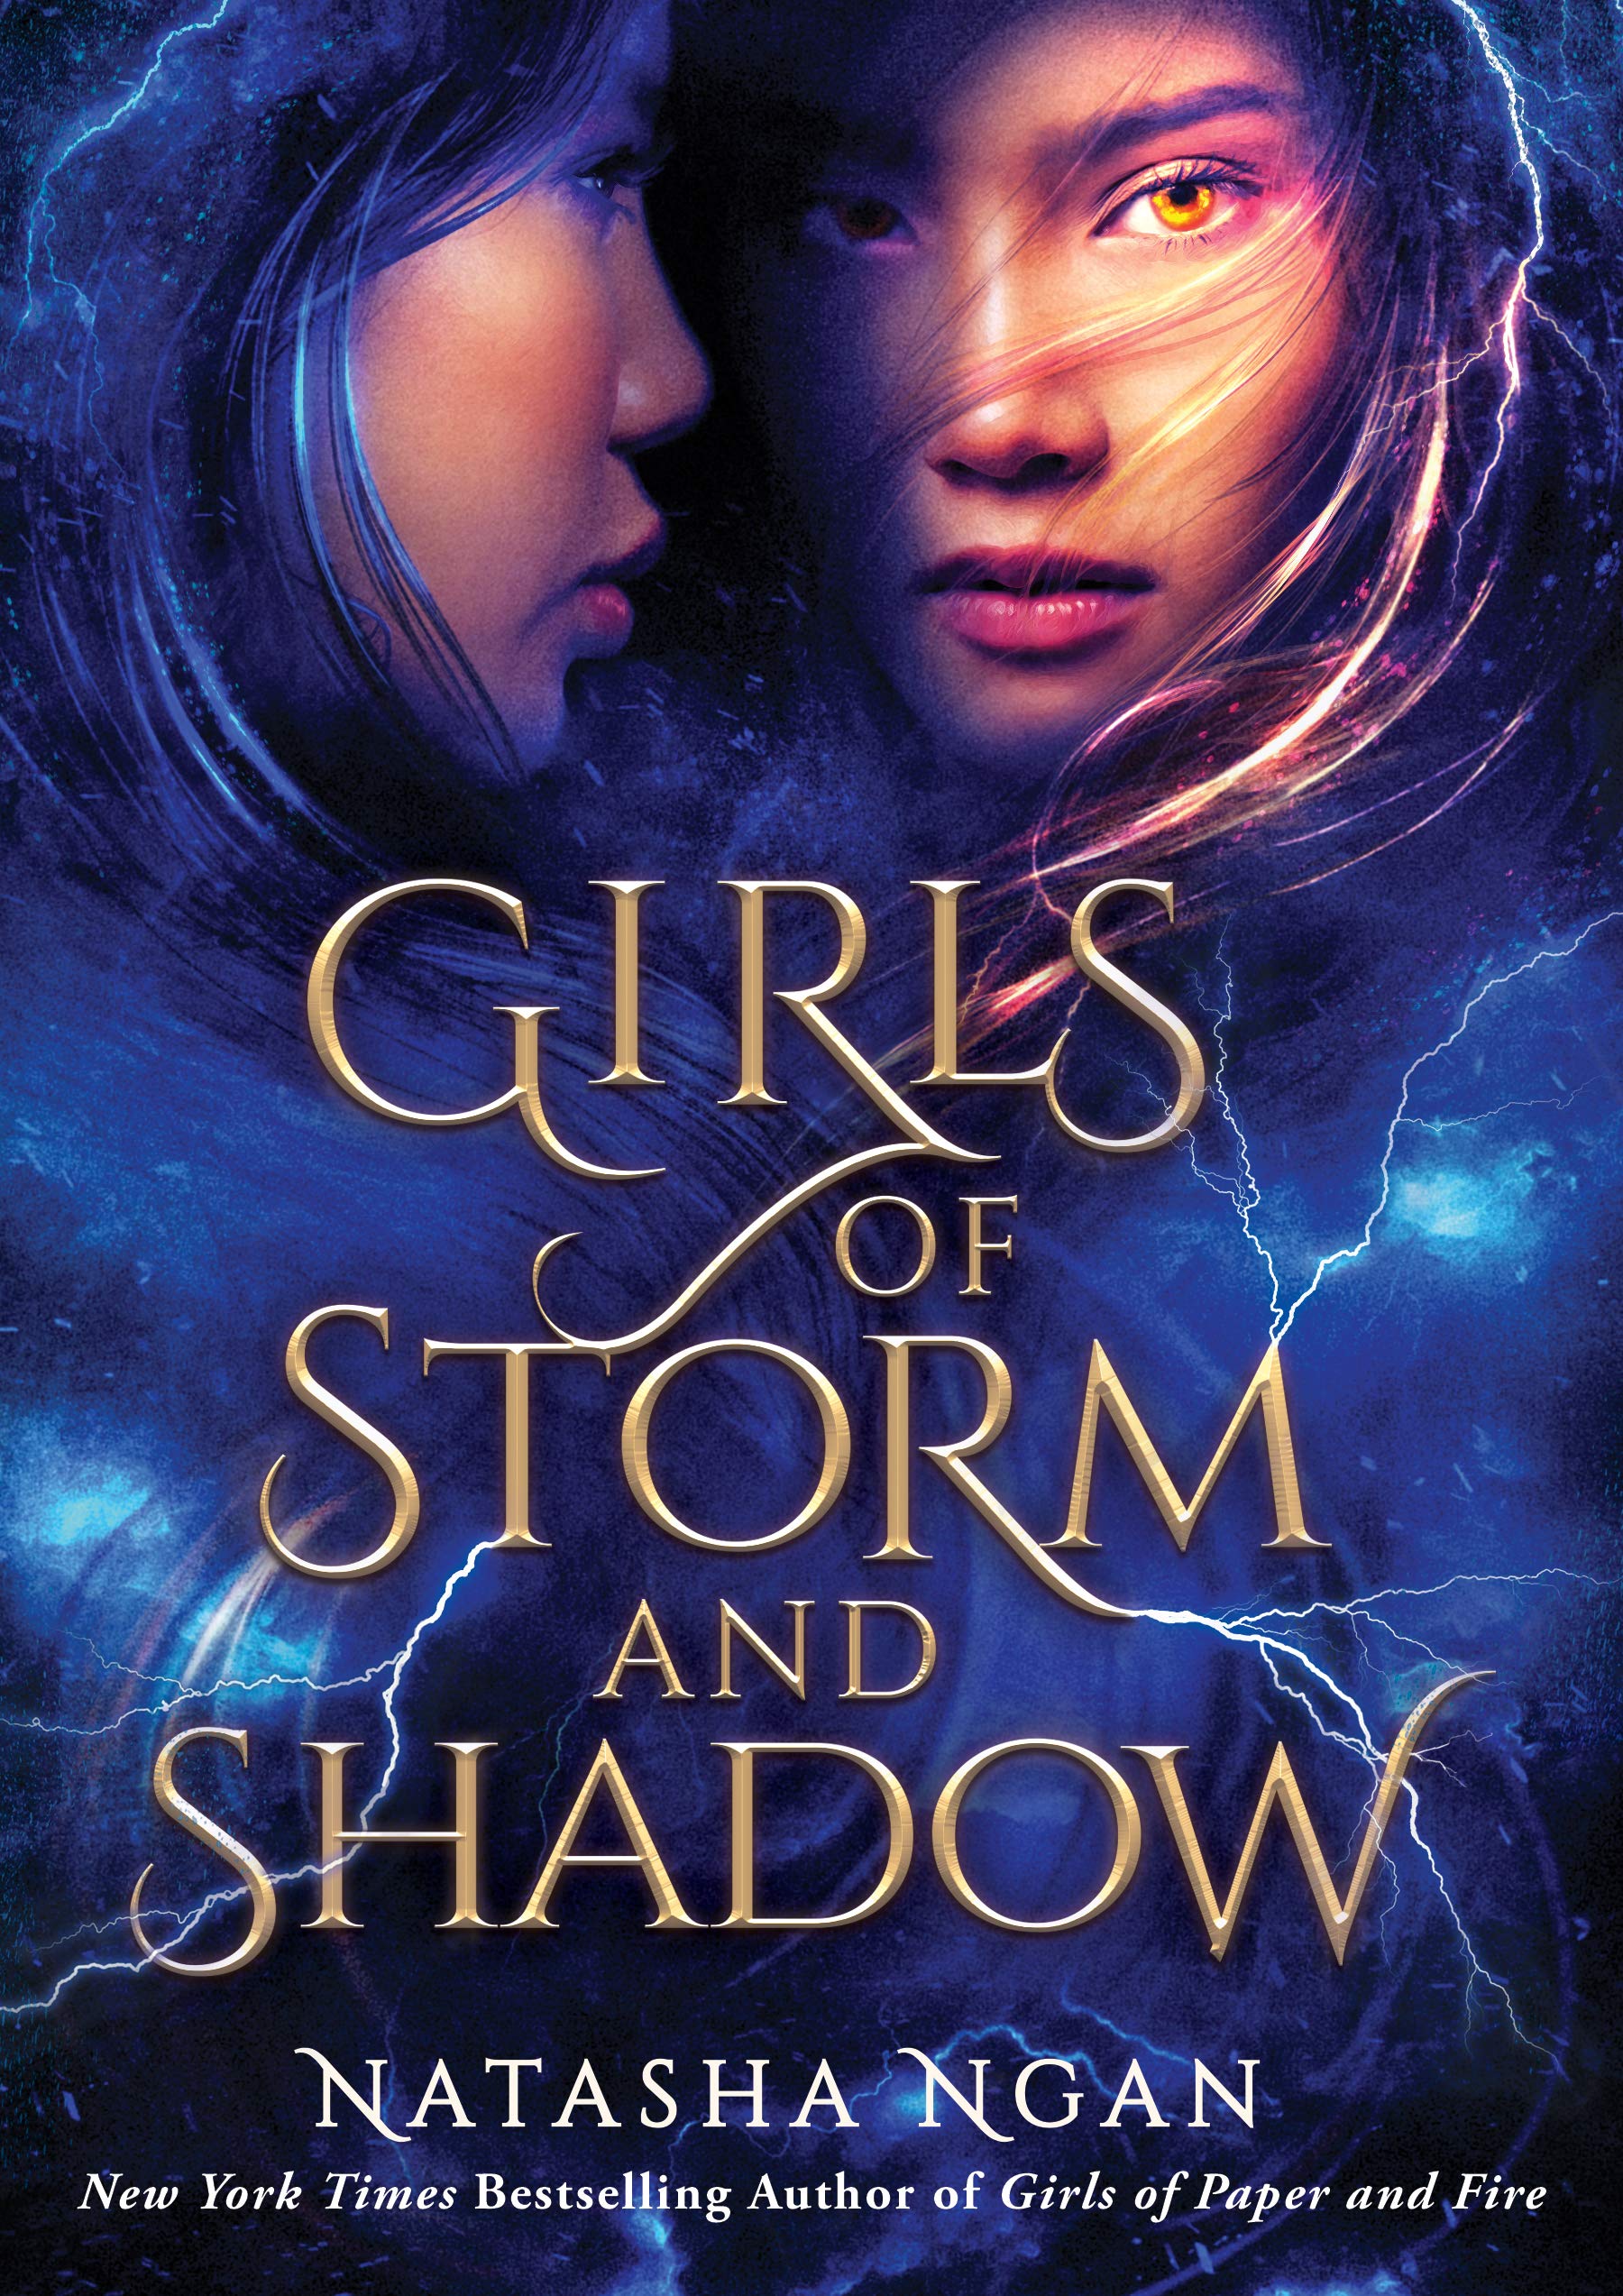 Girls of Storm and Shadow book cover